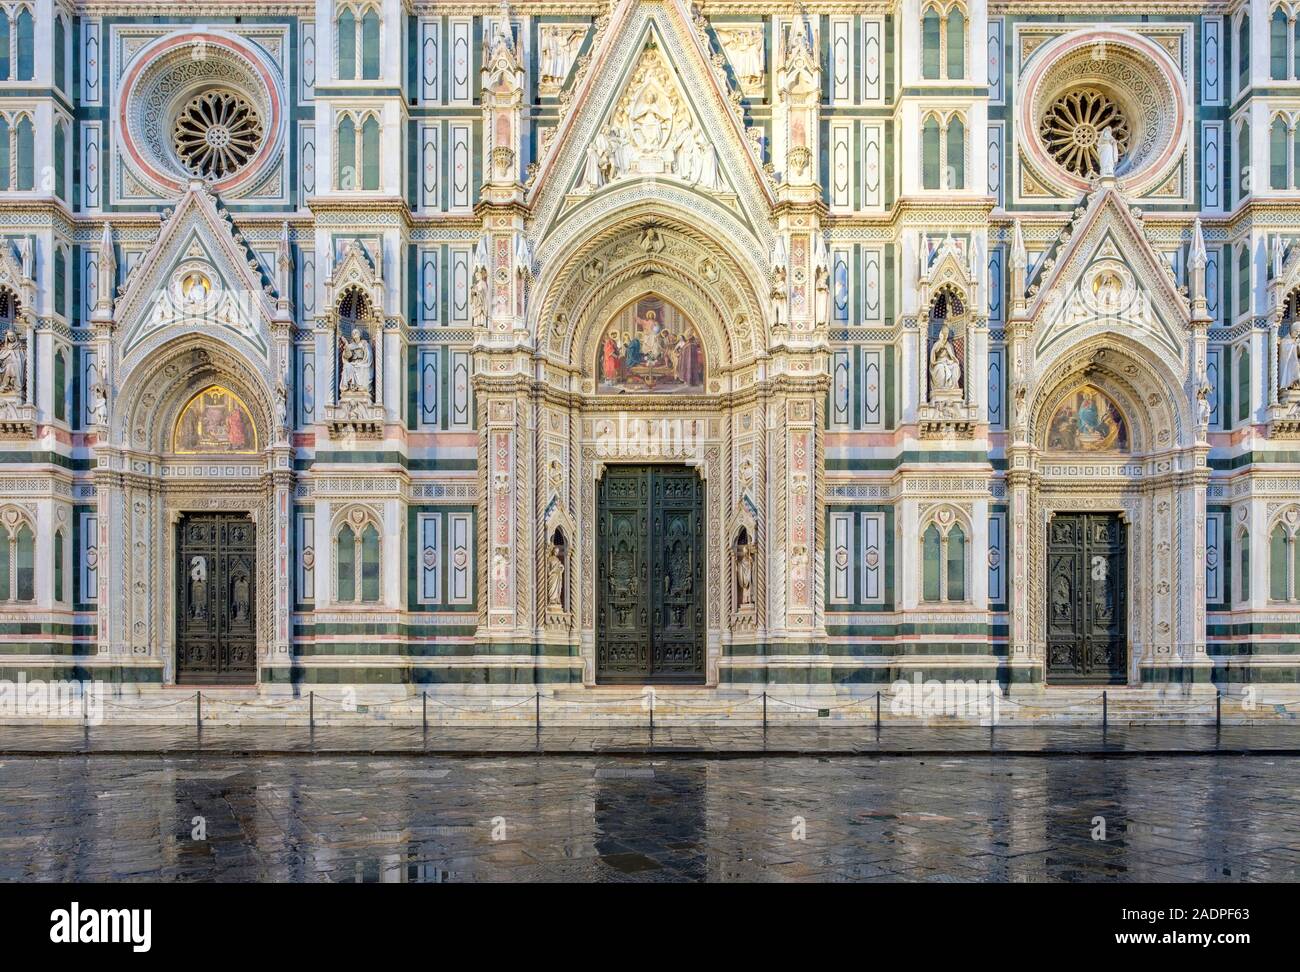 Gothic Revival façade of Florence Cathedral (Duomo di Firenze), Florence (Firenze), Tuscany, Italy, Europe. Stock Photo